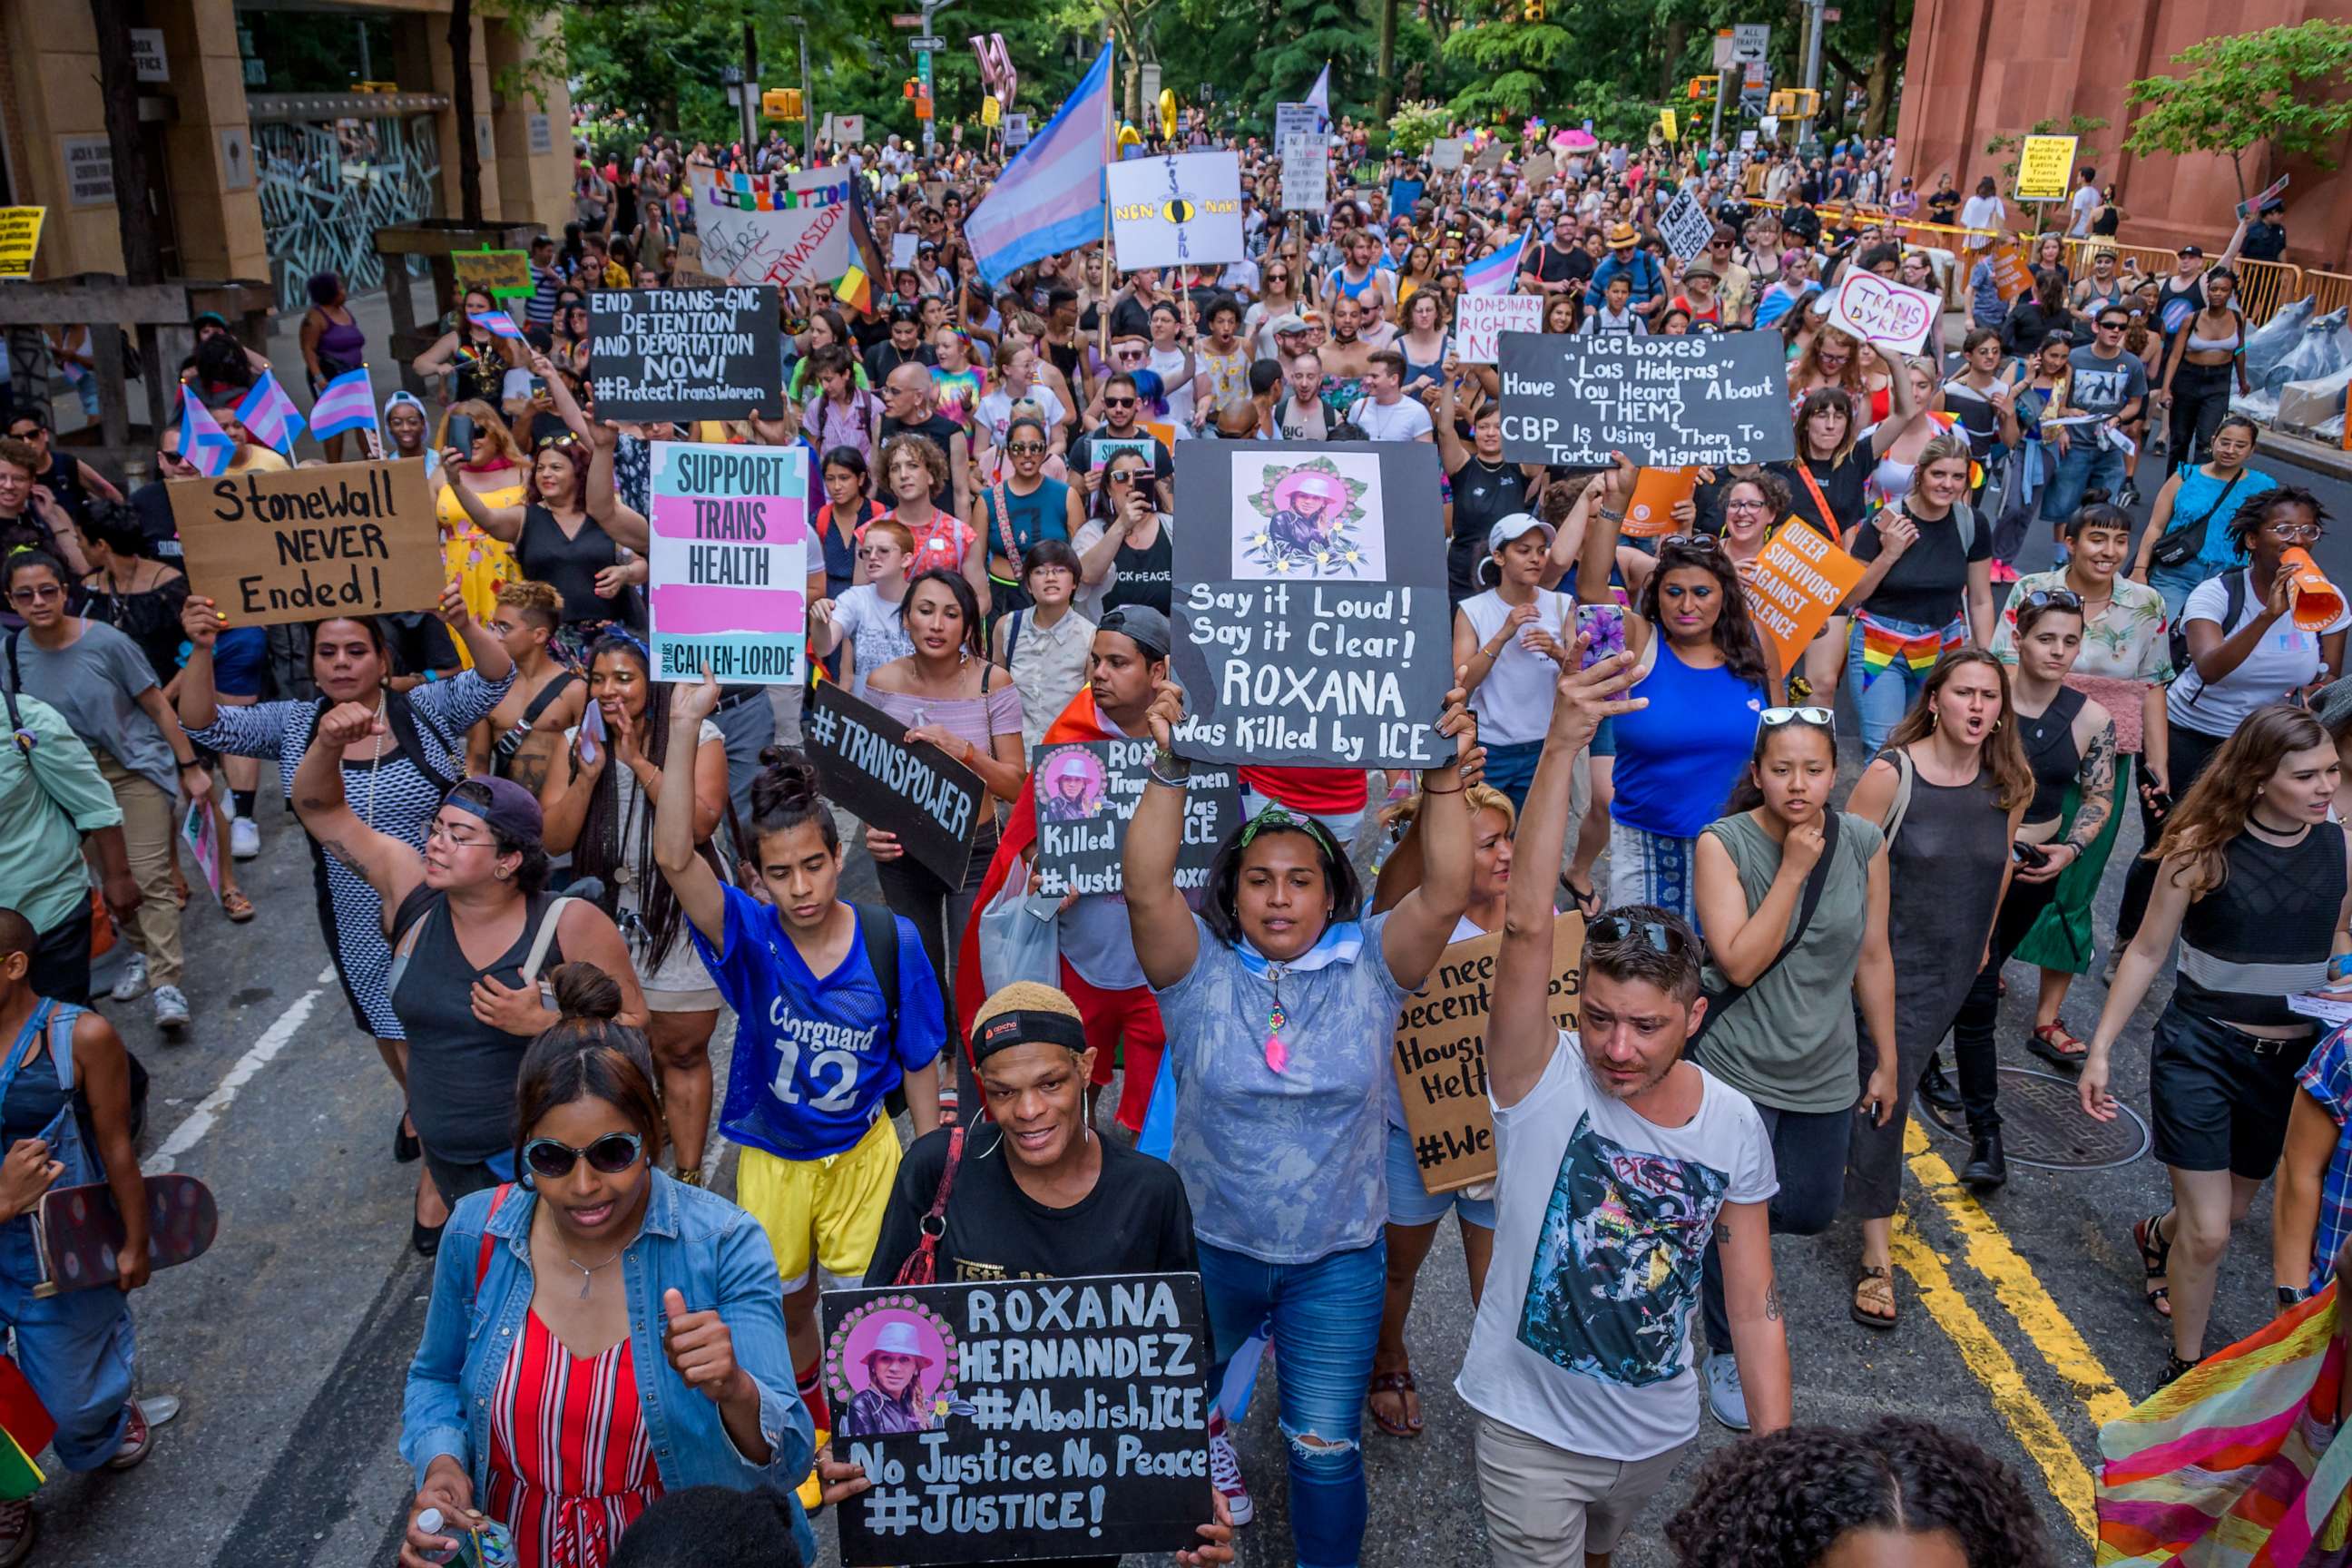 PHOTO: Trans, Gender Non-Conforming, Lesbian, Gay, Bi, and Two Spirit organizations and allies gathered at Washington Square Park for the 15th Annual Trans Day of Action on June 28, 2019.